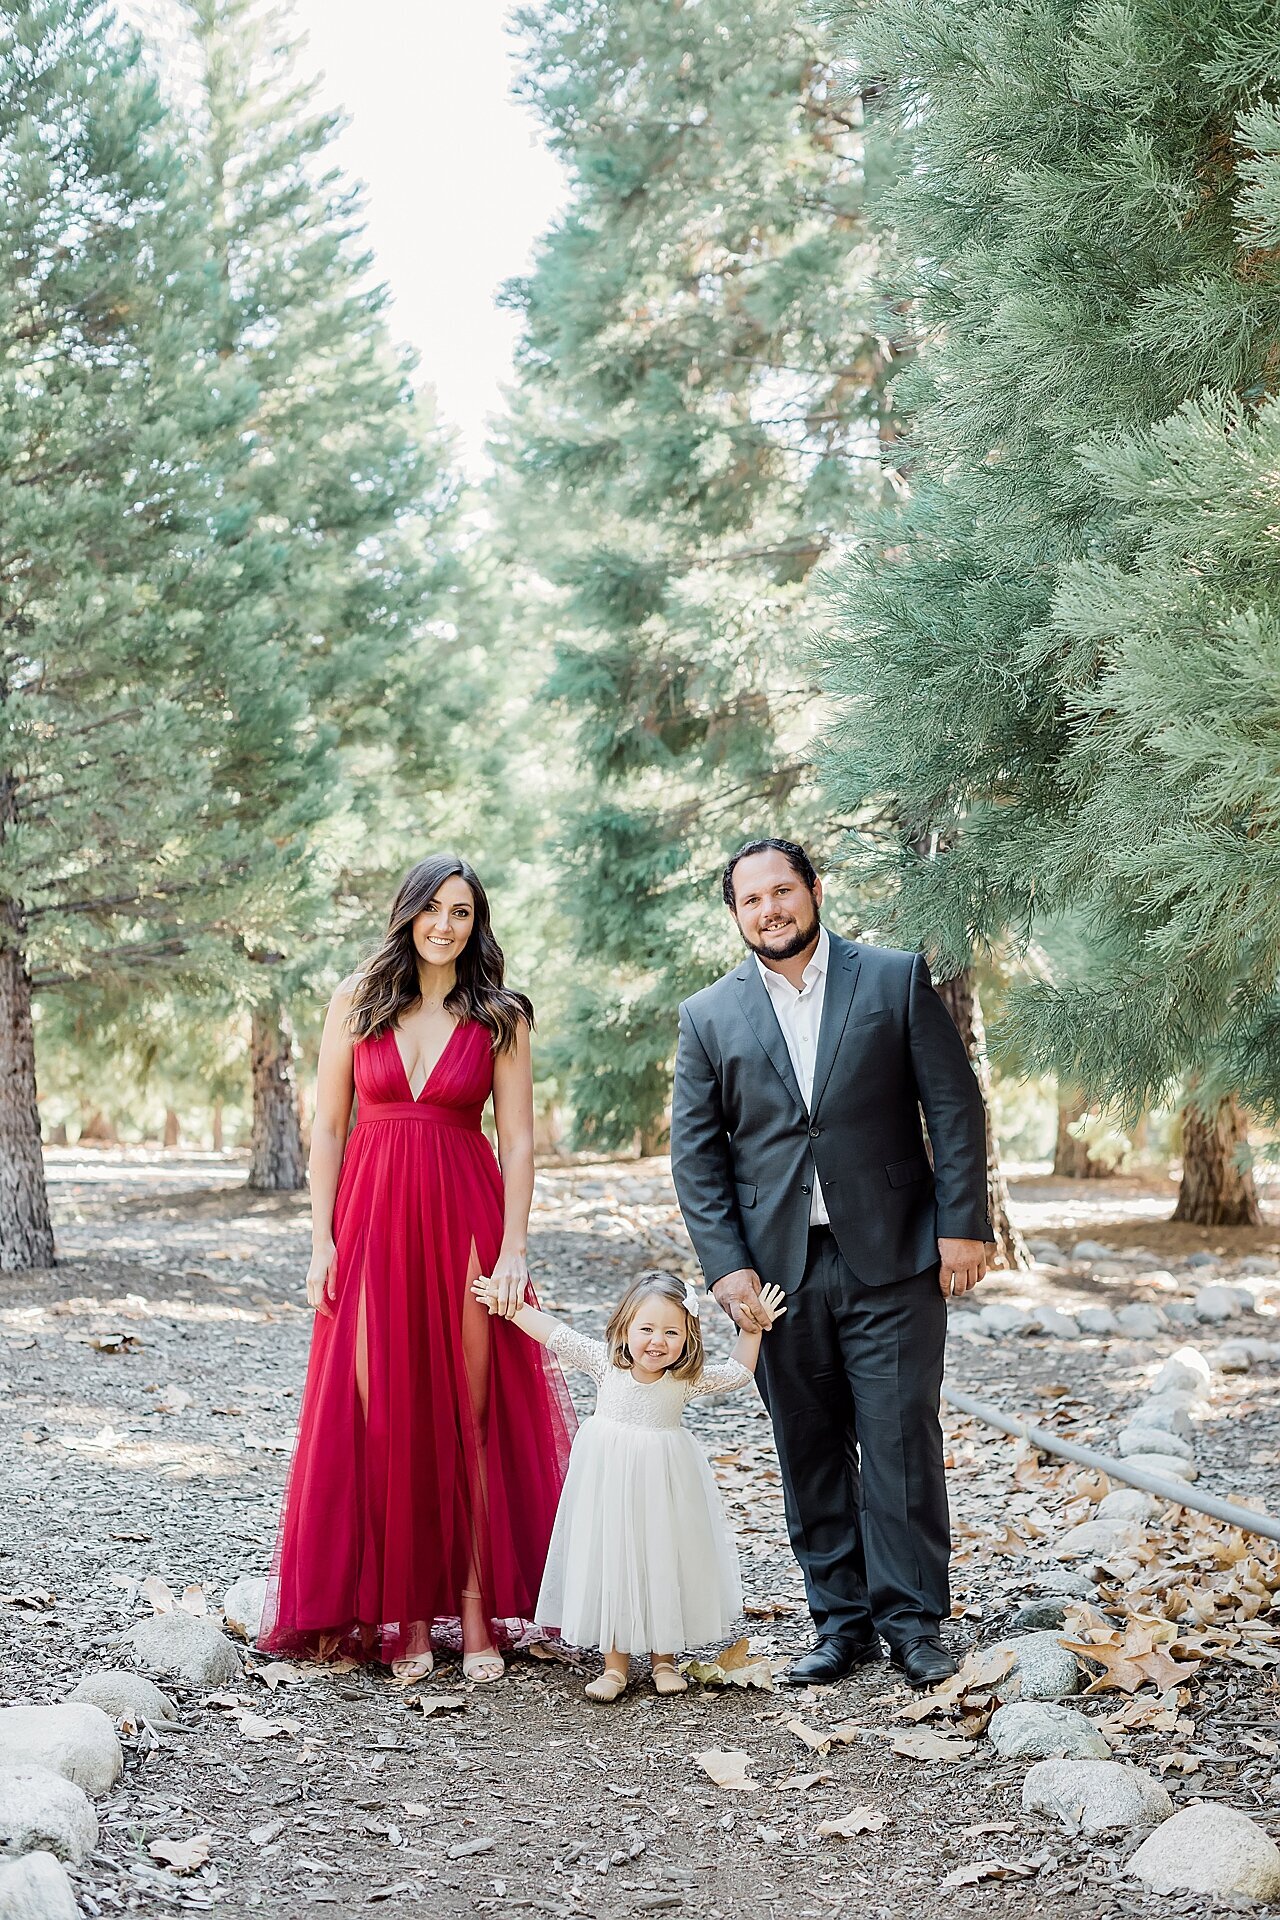 MIchelle Peterson Photography Redlands California wedding and portrait photographer_1207